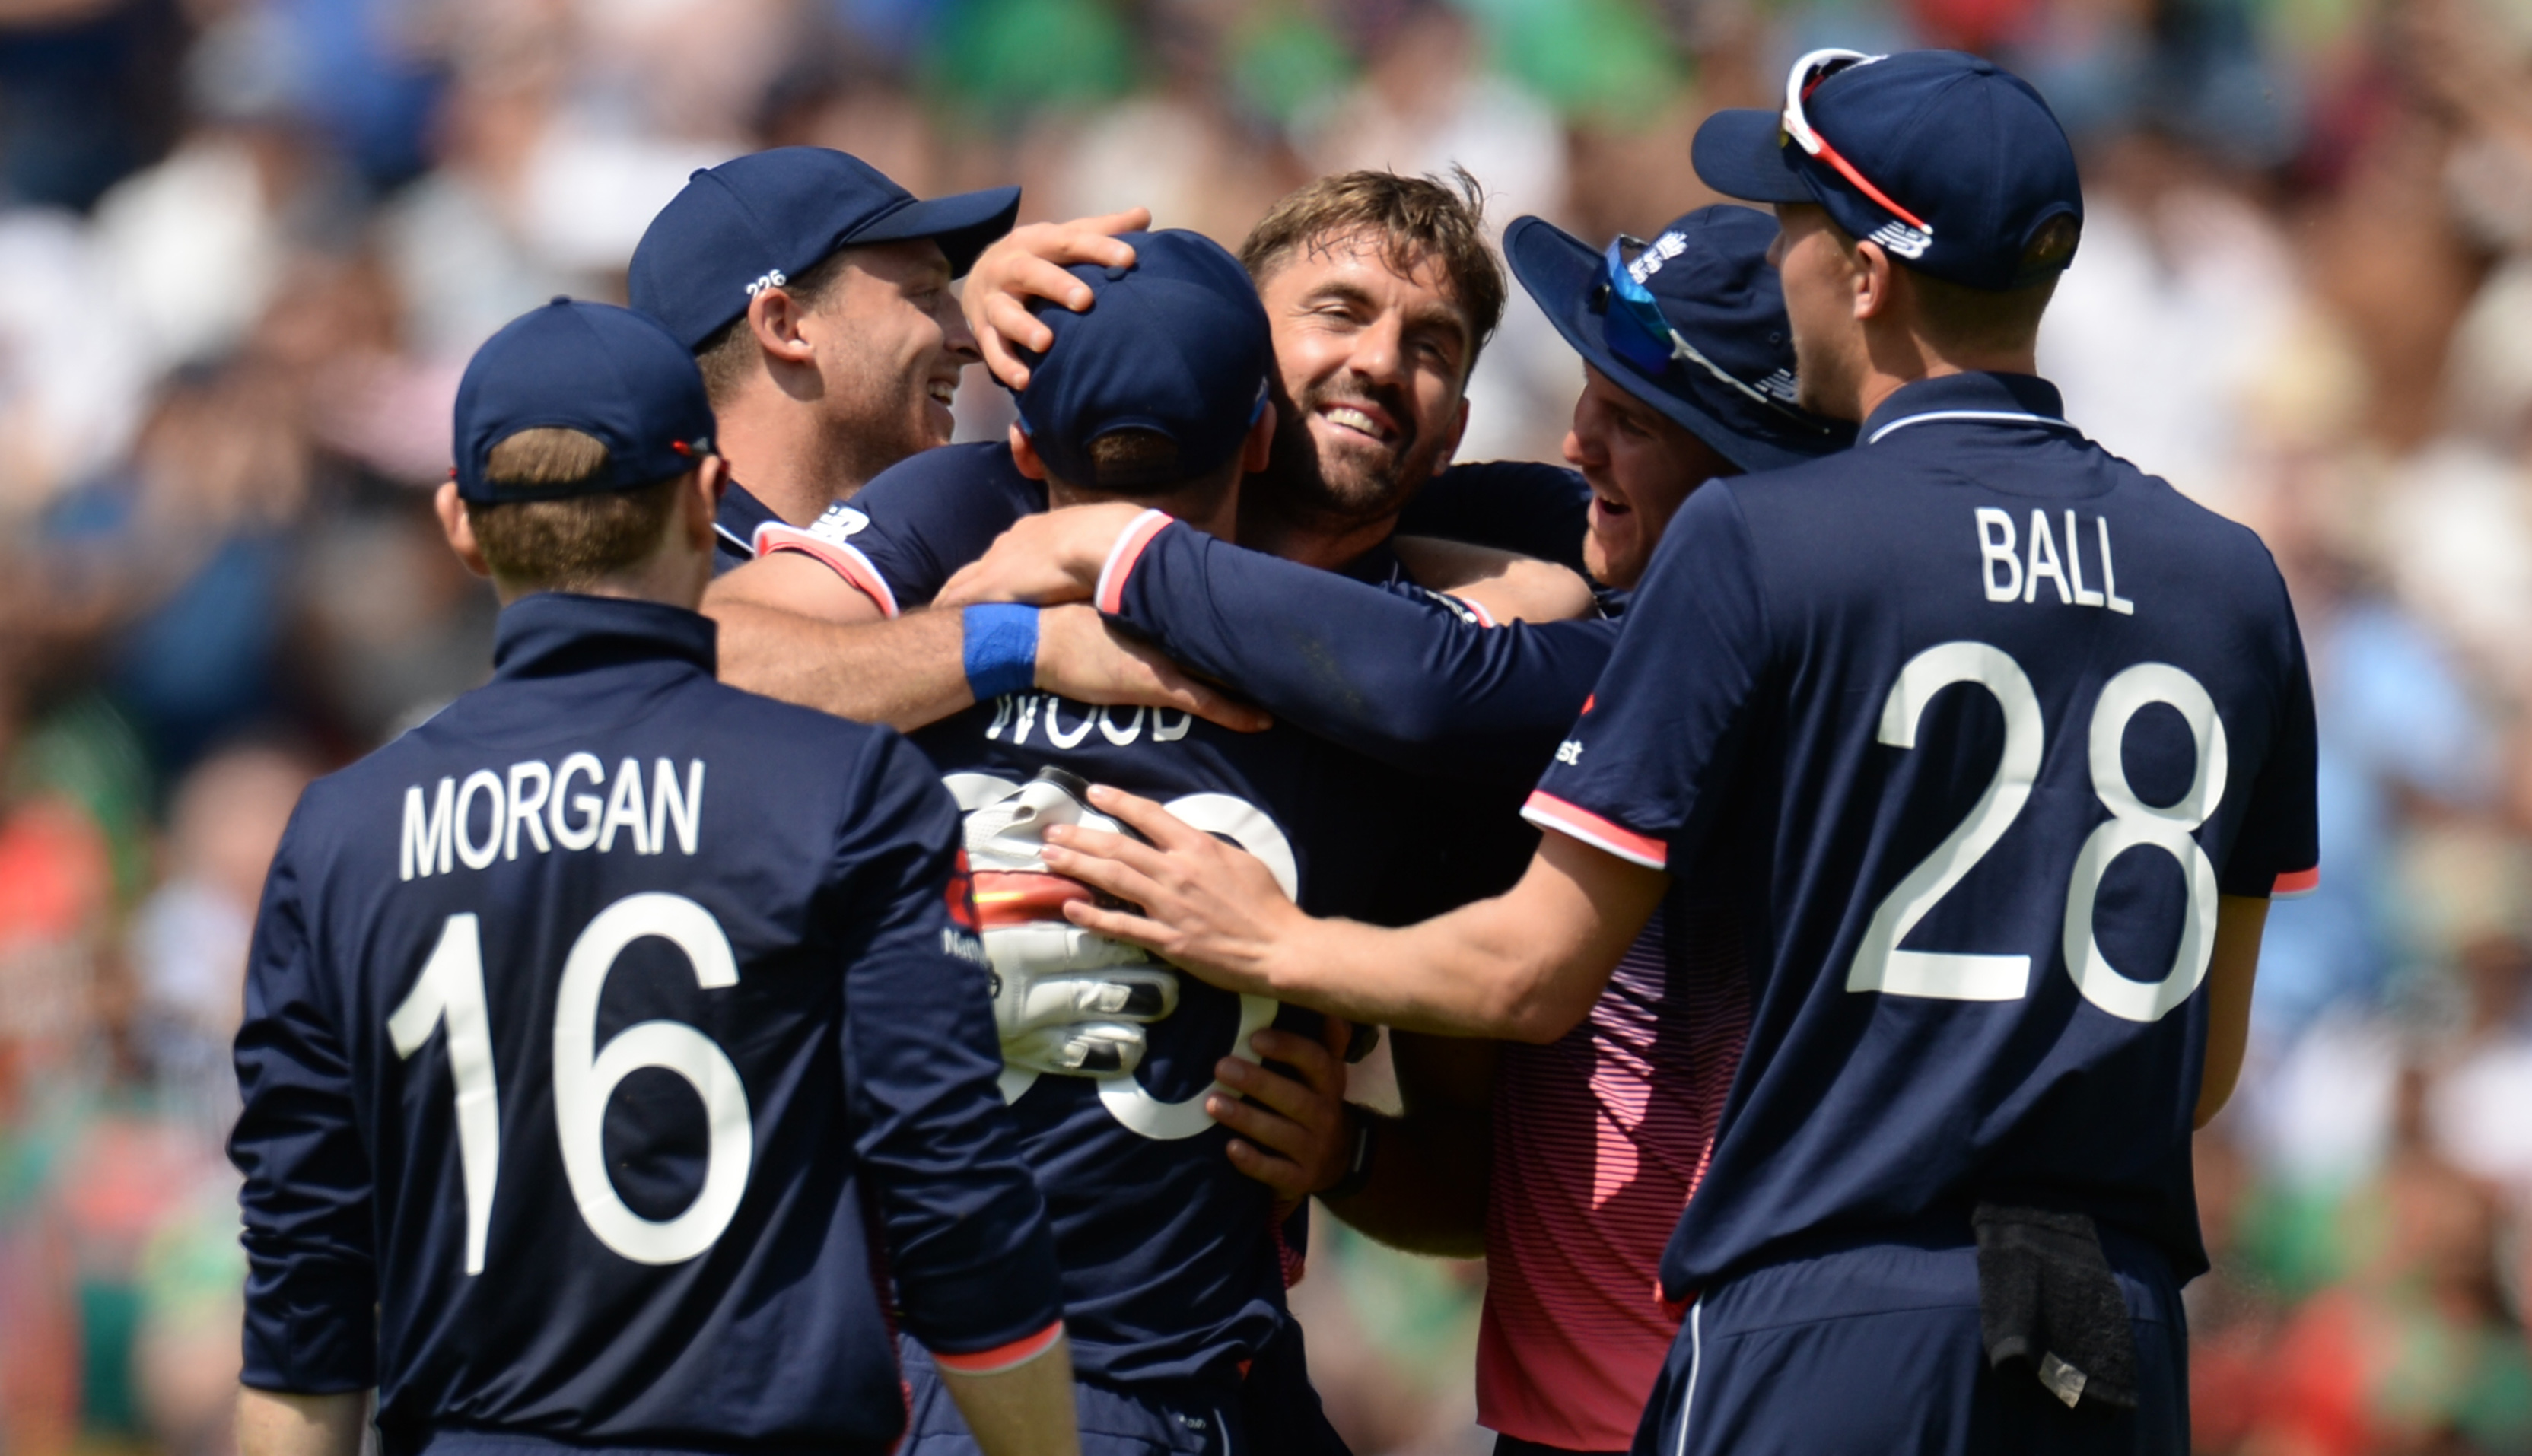 Champions Trophy | England cruise into the semis with an emphatic win over New Zealand